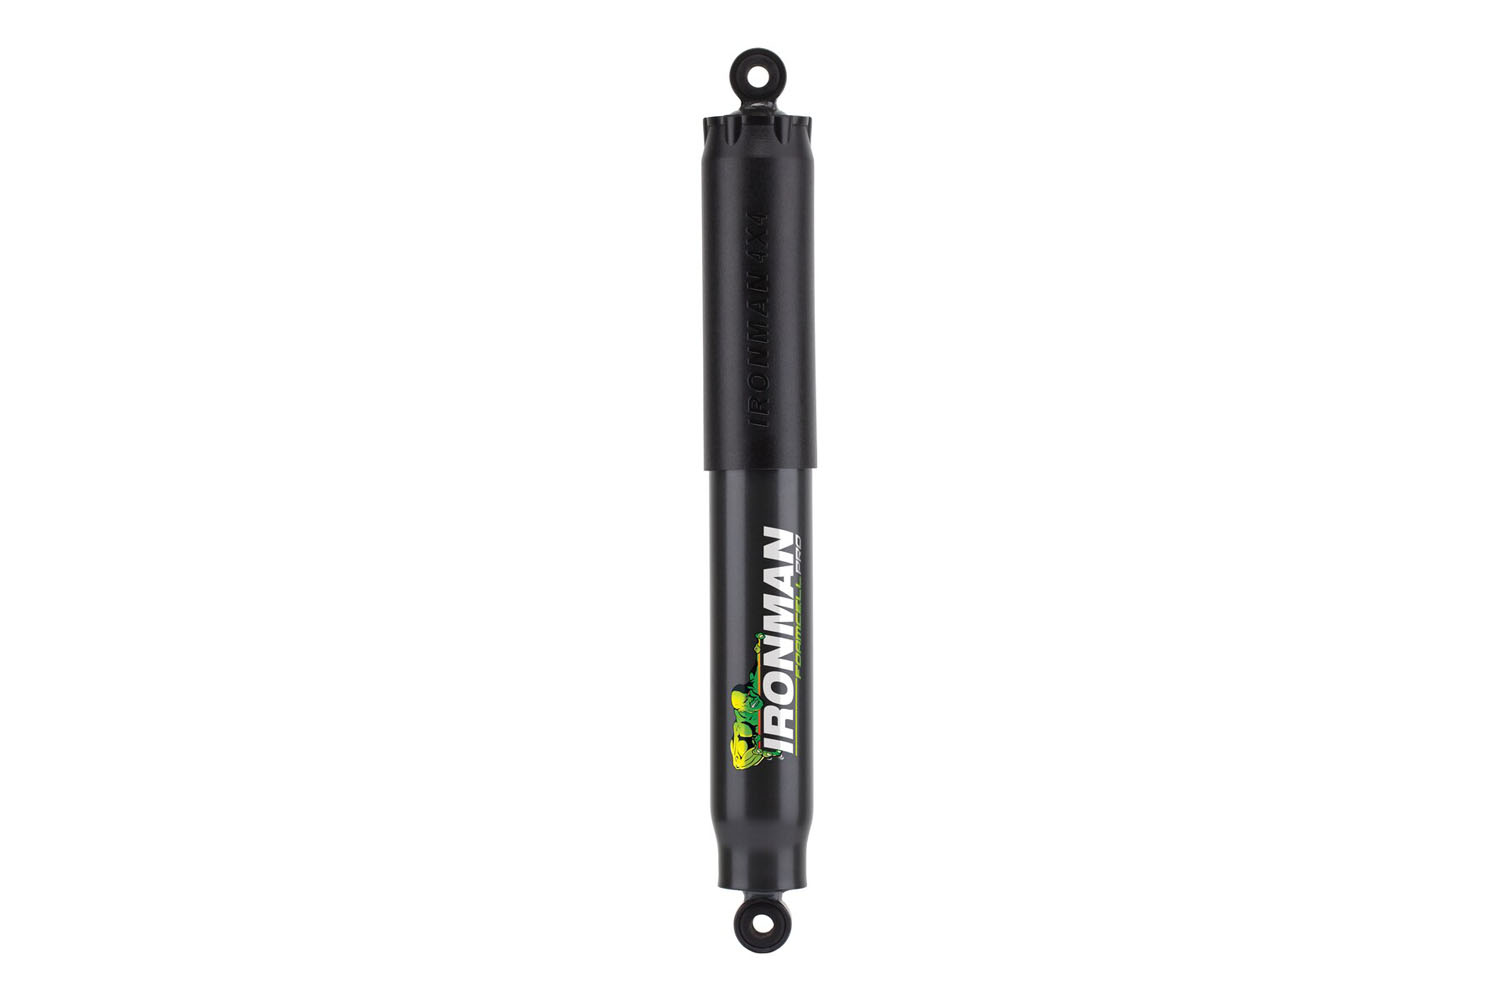 Will these shocks work on a 3.5-4" lift?